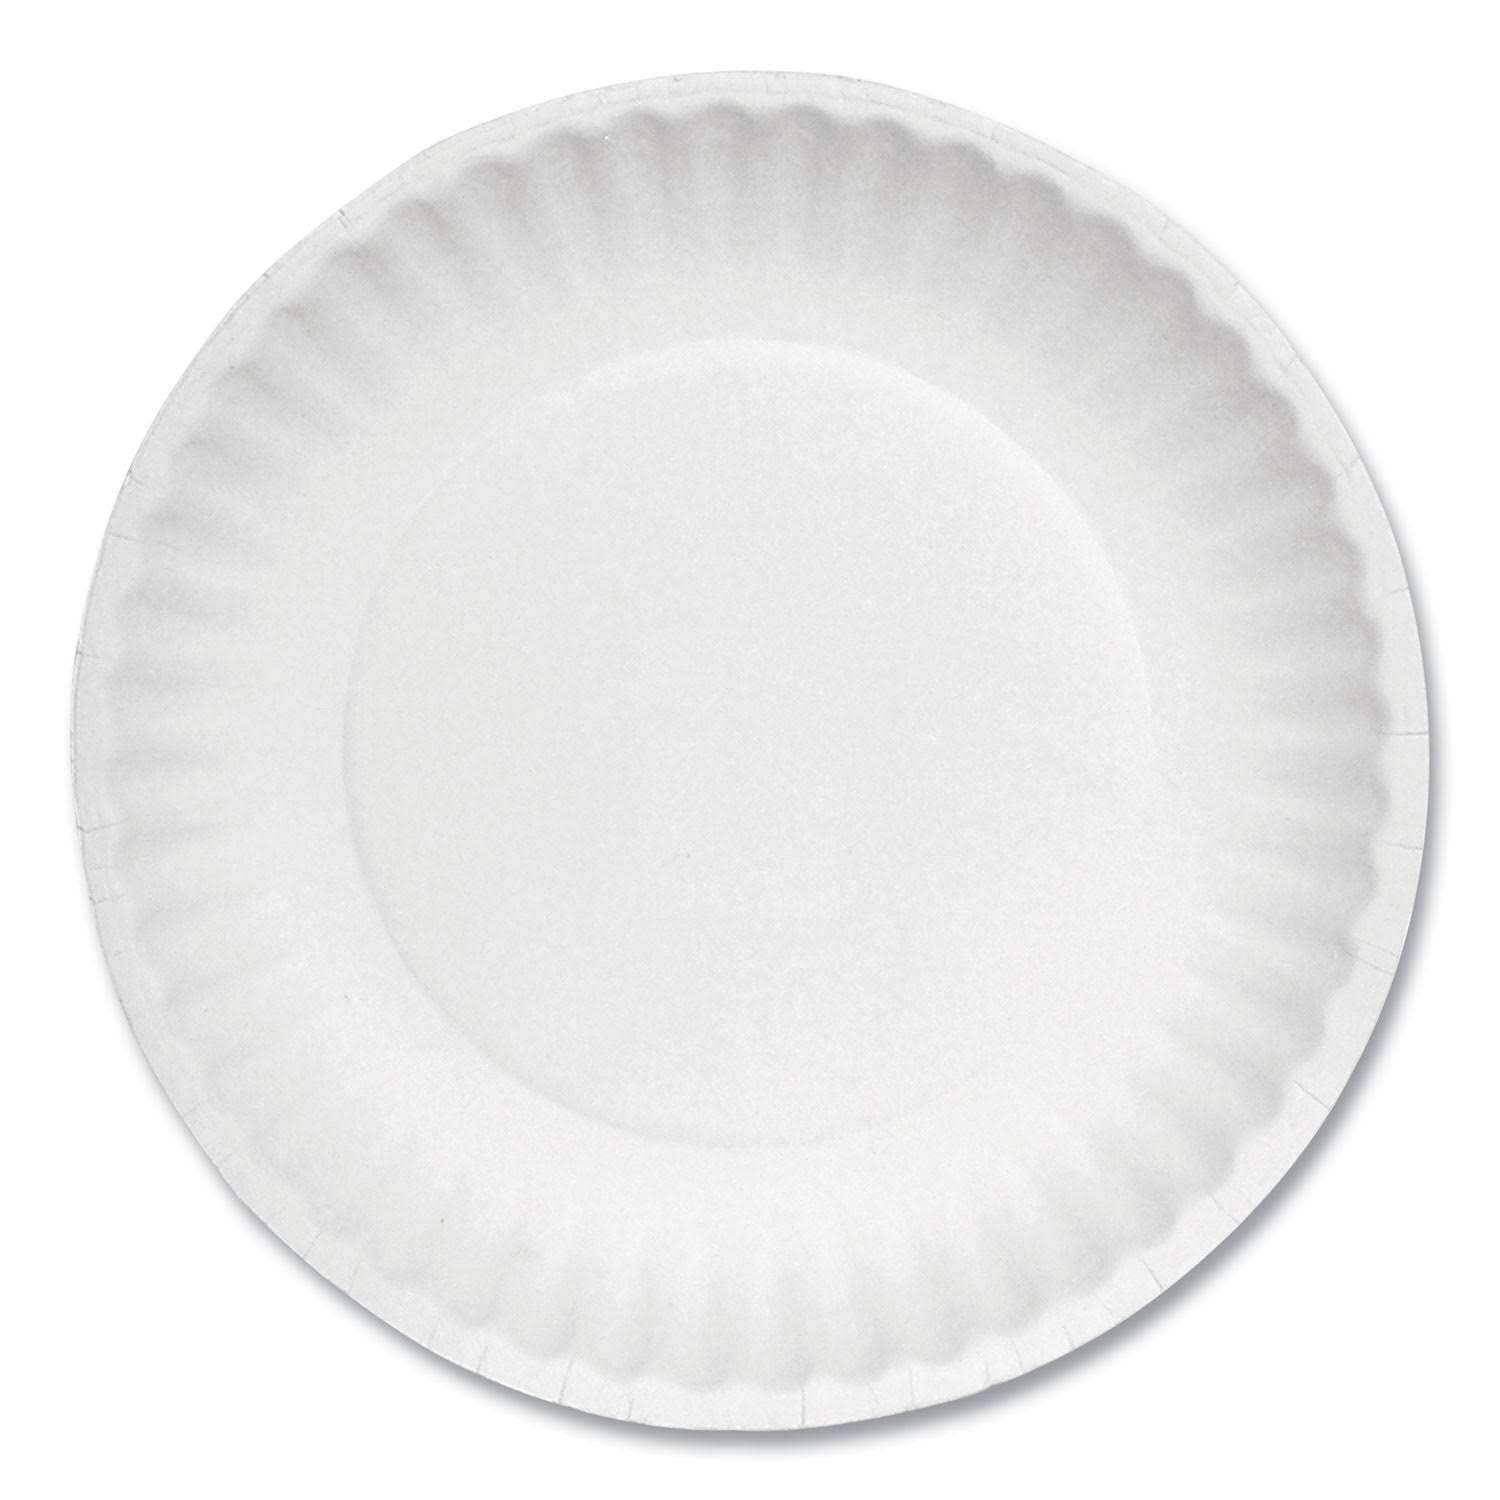 Green Label Paper Plates - White, Uncoated, 6", 100ct